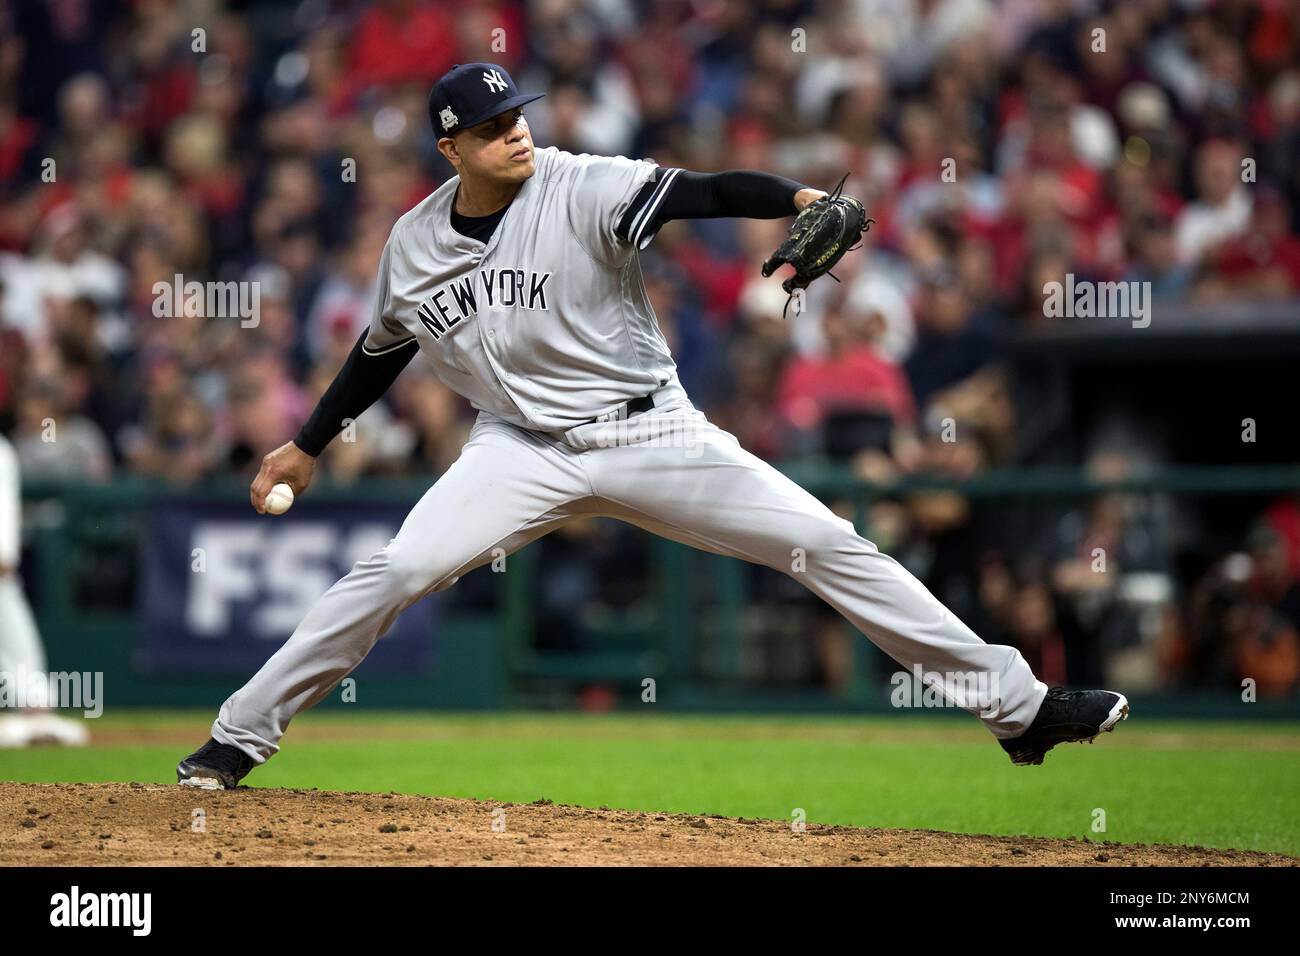 CLEVELAND, OH - OCTOBER 05: New York Yankees pitcher Dellin Betances (68)  delivers a pitch to the plate during the eighth inning of the 2017 American  League Divisional Series Game 1 between